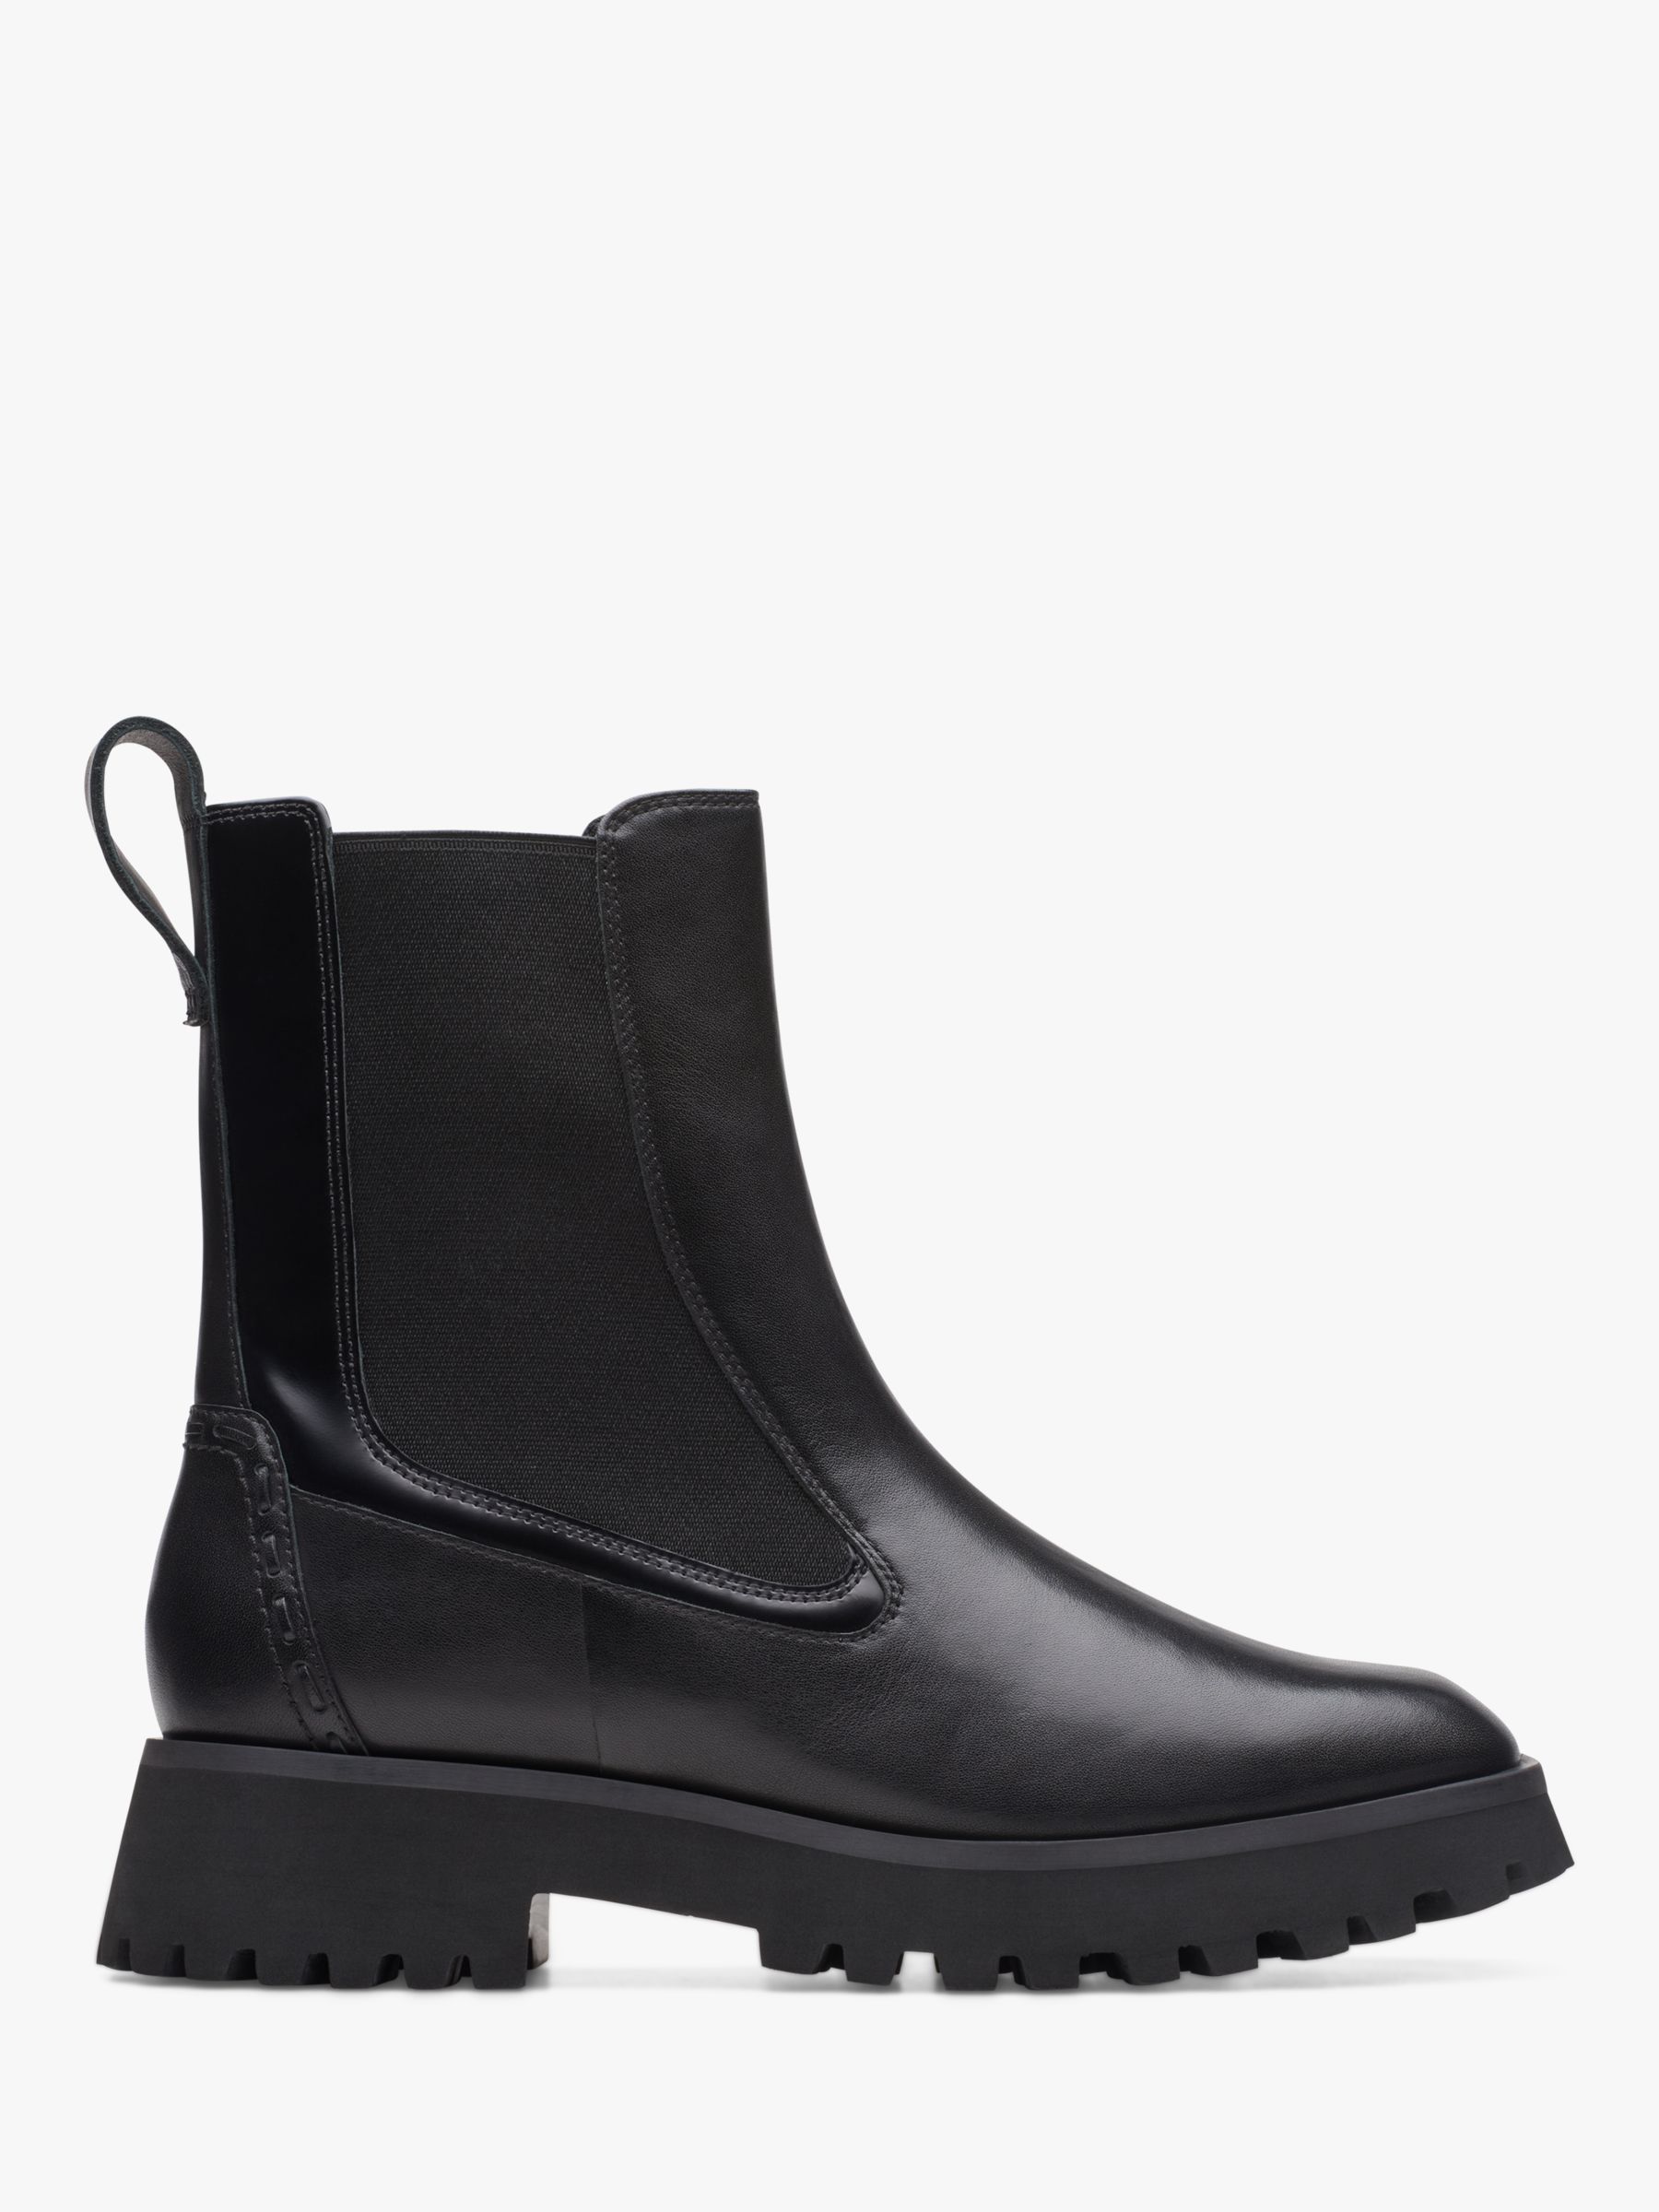 Clarks Stayso Rise Leather Chelsea Boots, Black at John Lewis & Partners